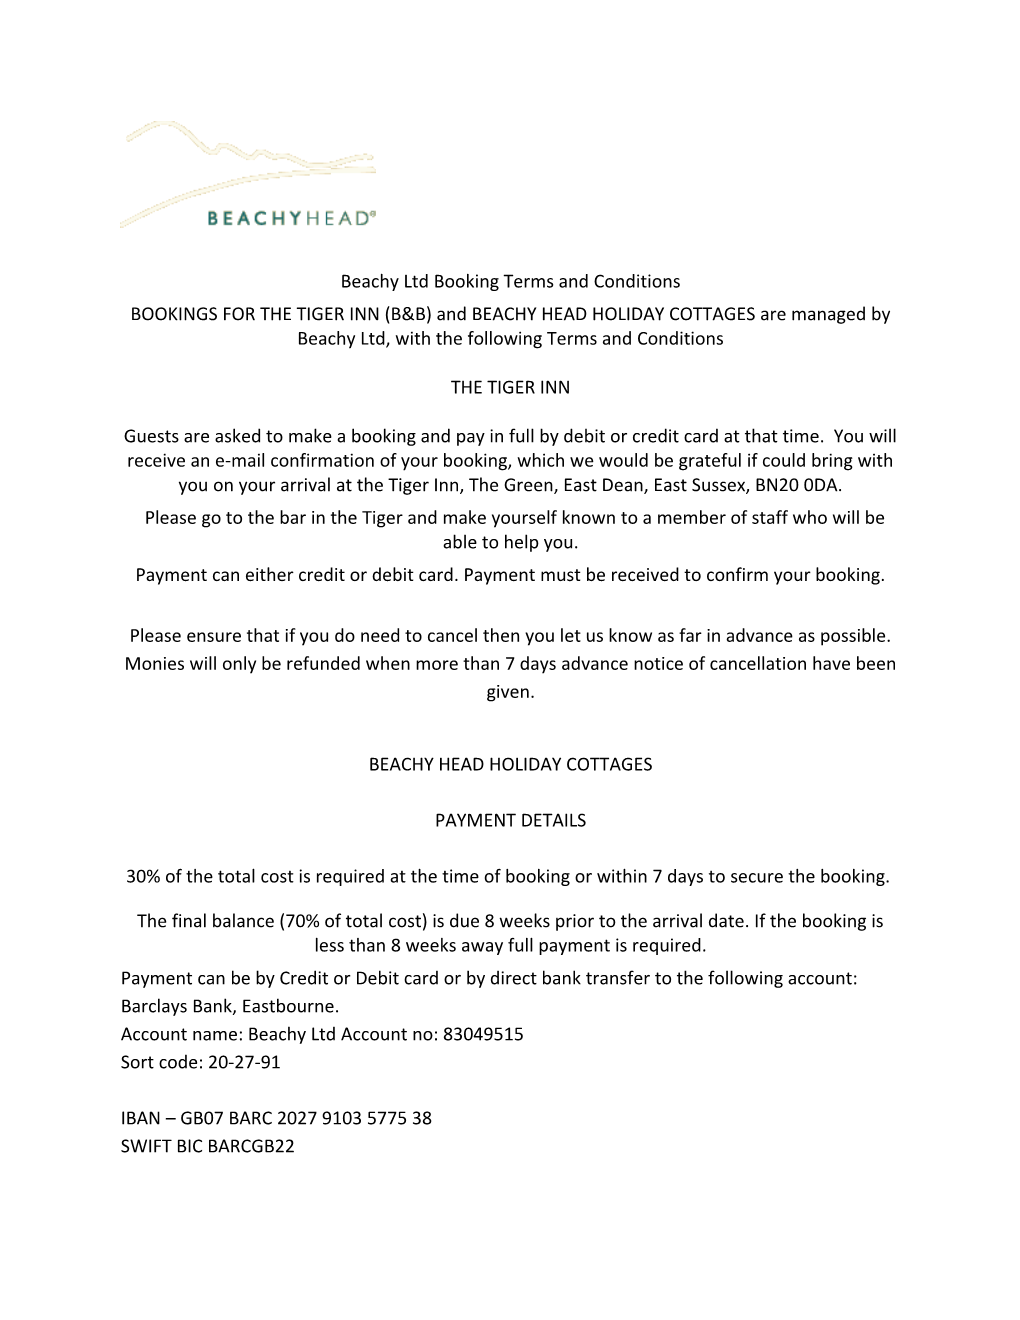 Beachy Ltd Booking Terms and Conditions